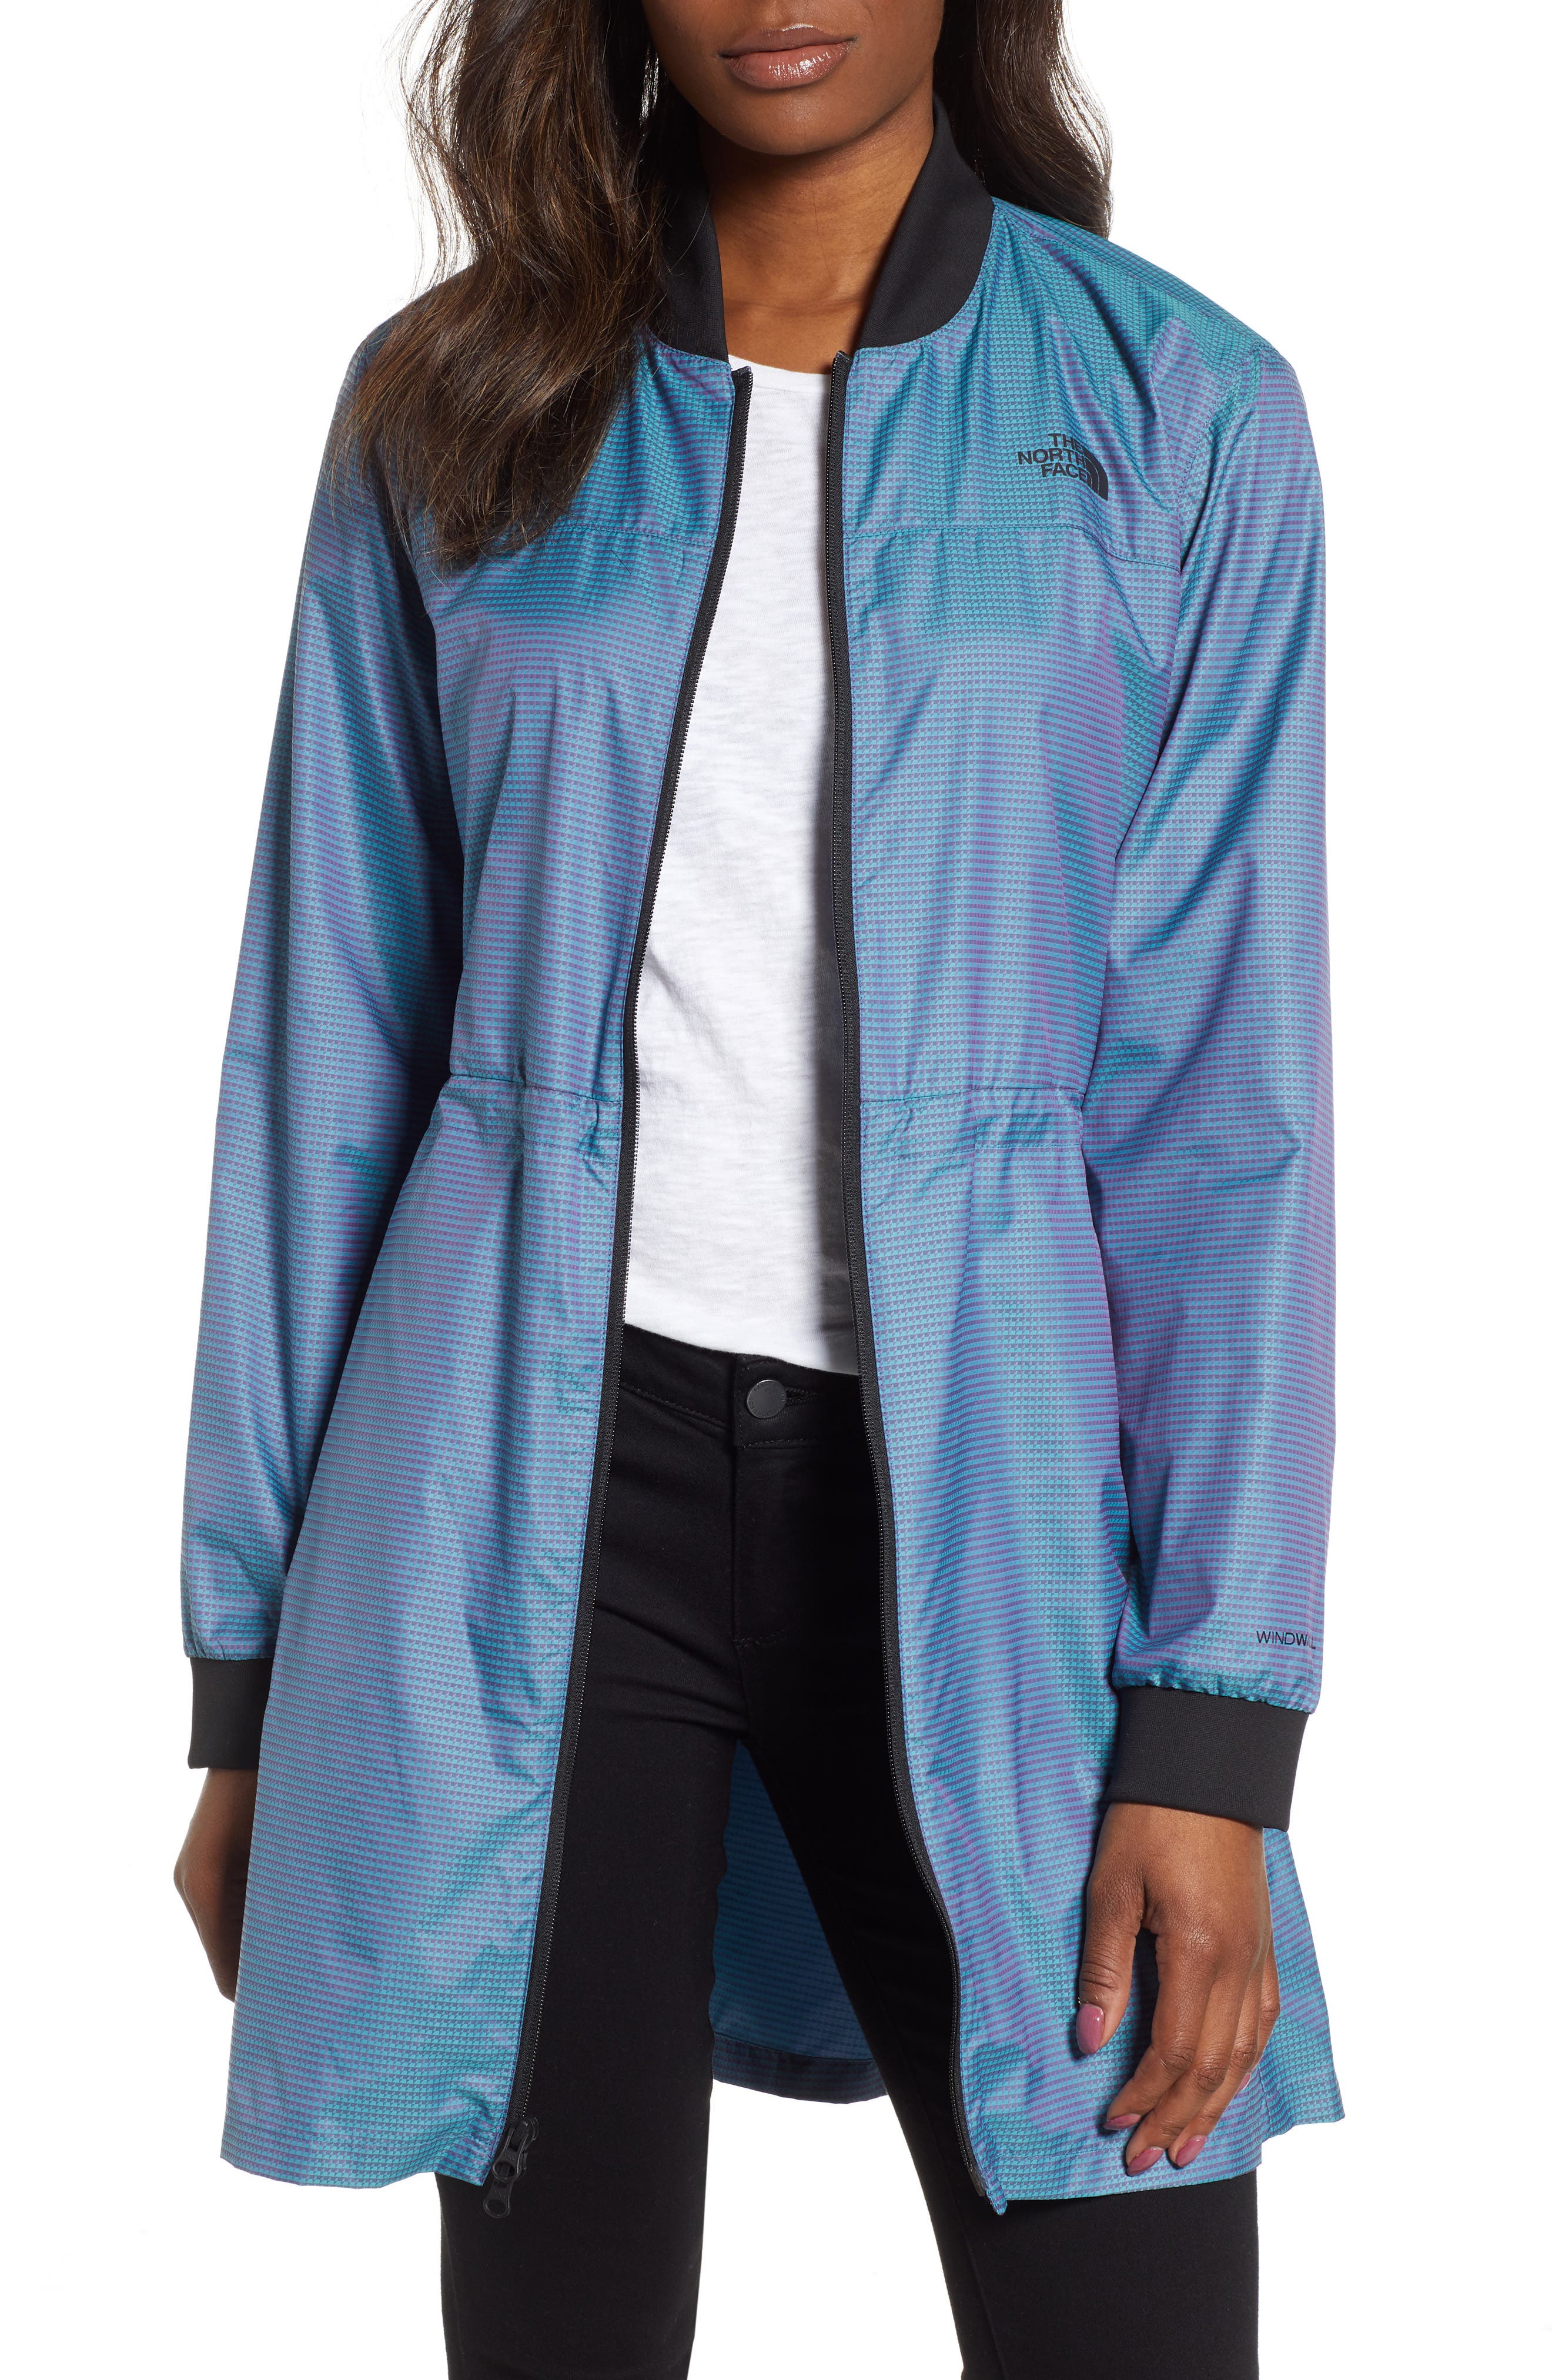 the north face women's flybae bomber jacket